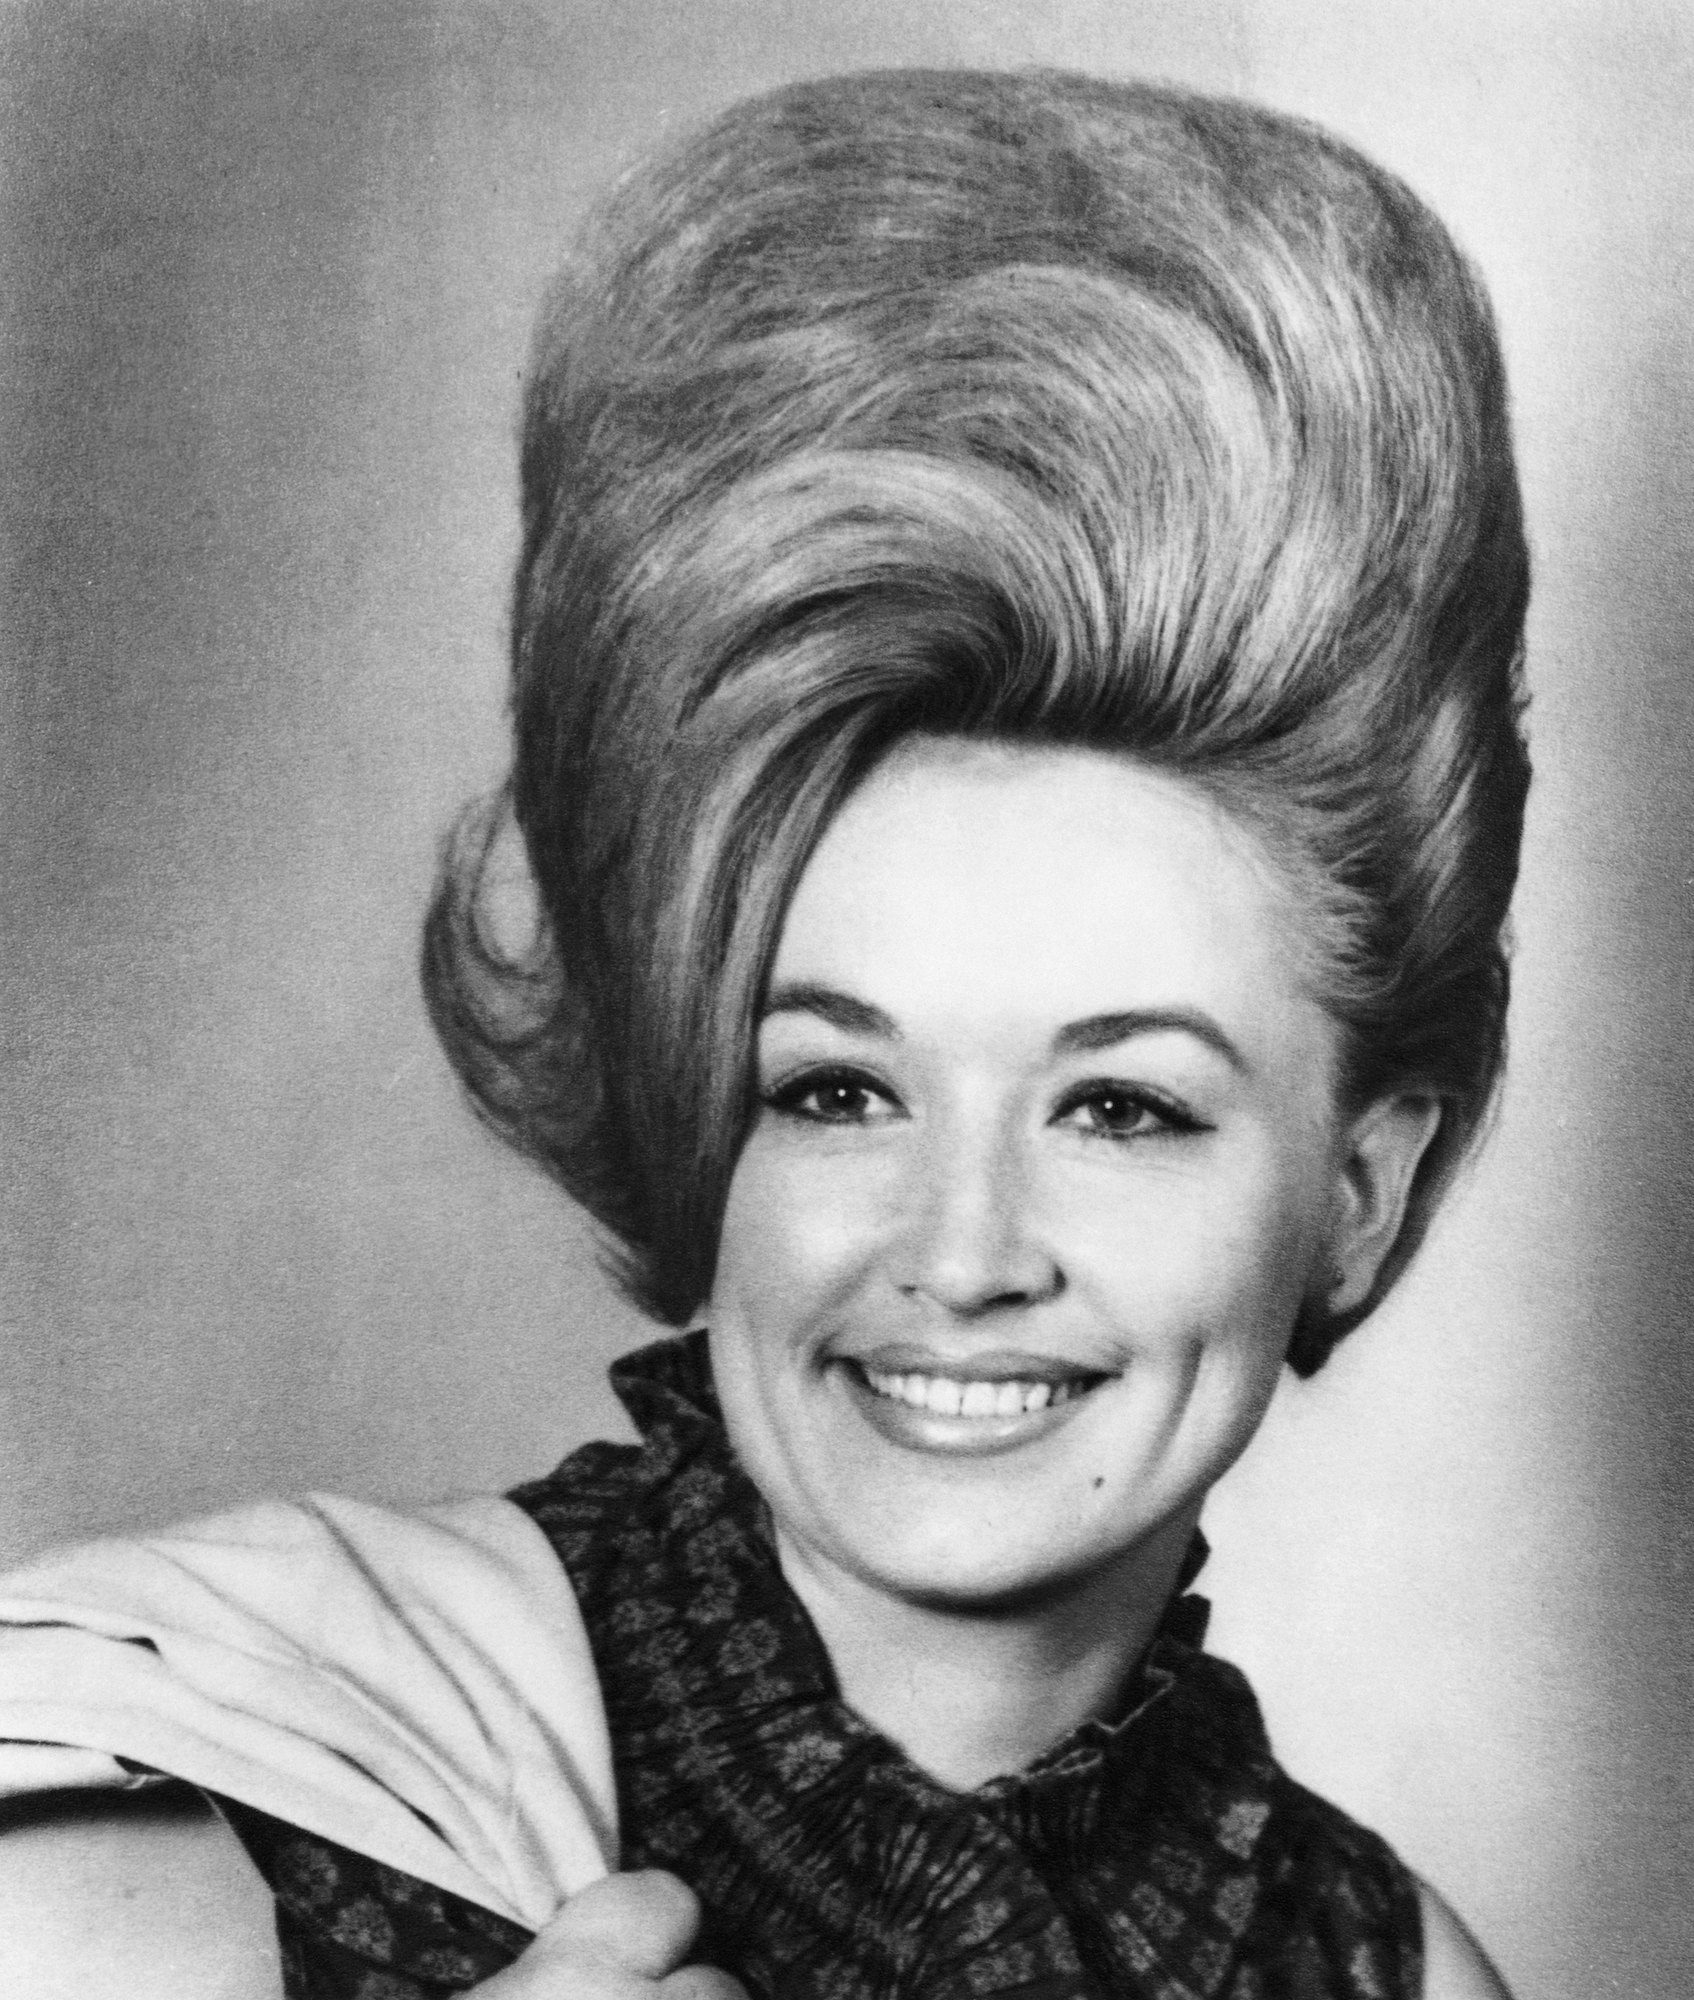 Dolly Parton posing for a portrait in 1965